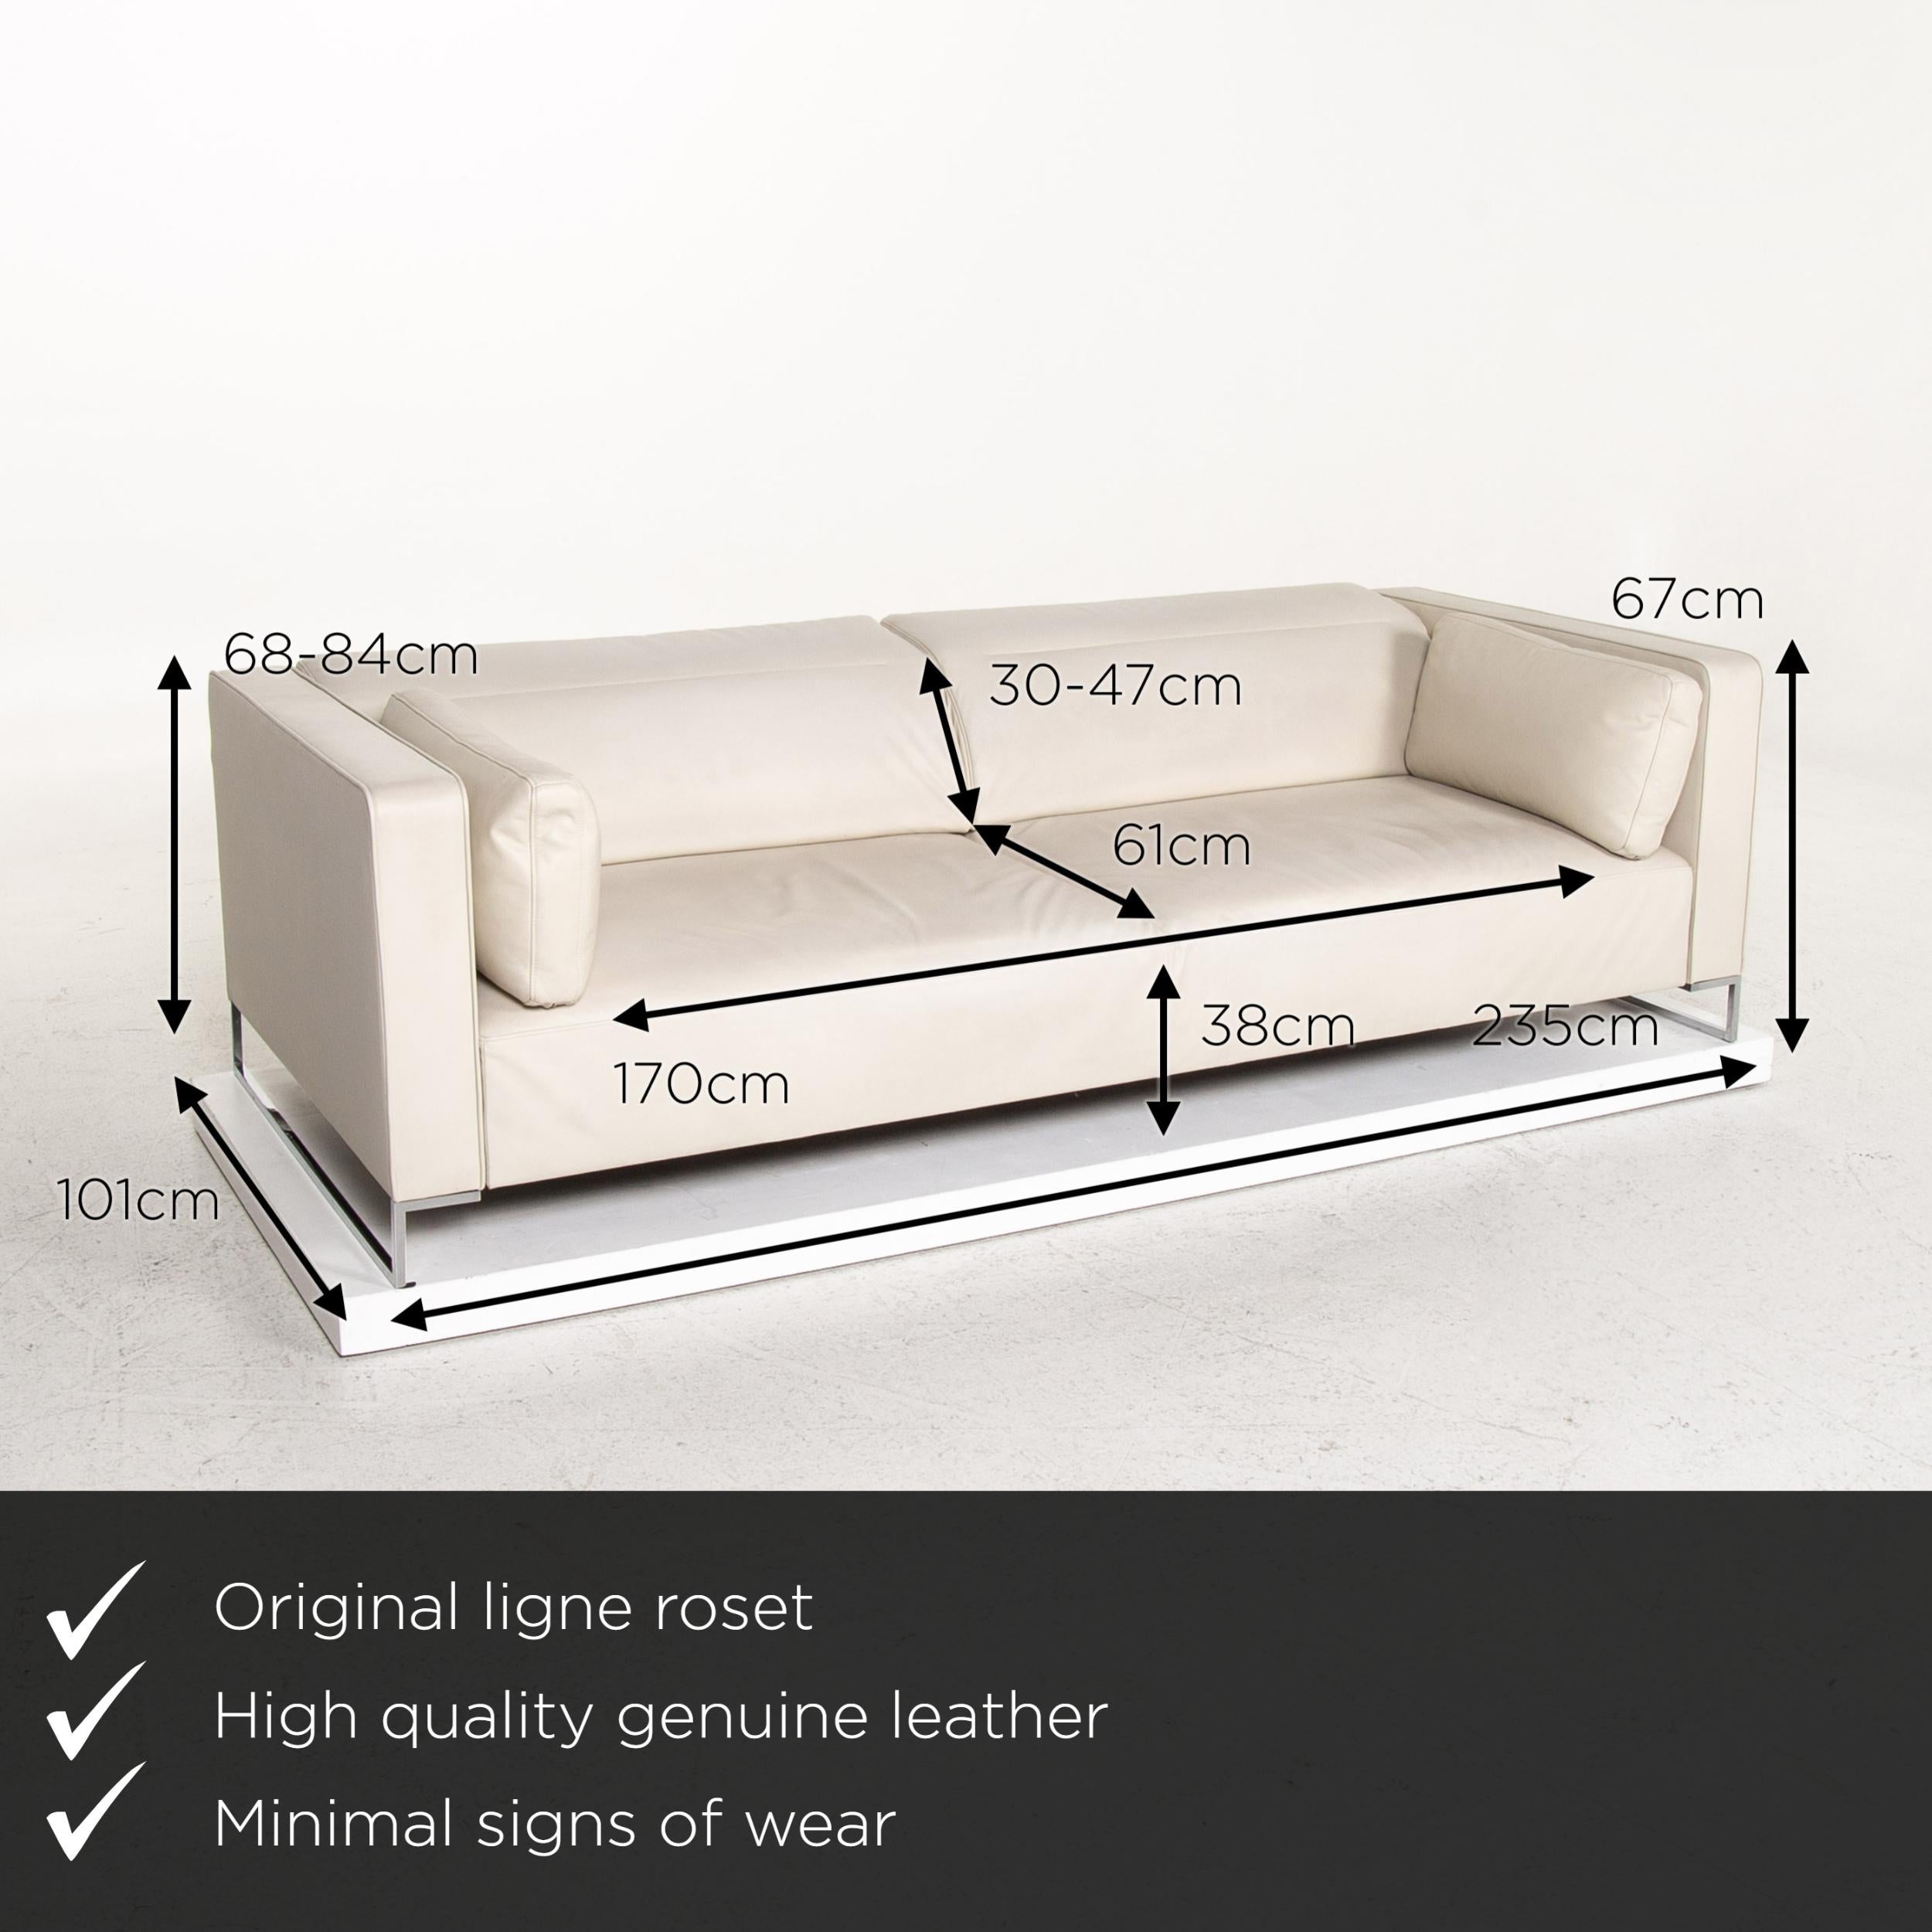 We present to you a Ligne Roset Urbani leather sofa cream three-seat couch.


 Product measurements in centimeters:
 

Depth 101
Width 235
Height 68
Seat height 38
Rest height 67
Seat depth 61
Seat width 170
Back height 30.
 